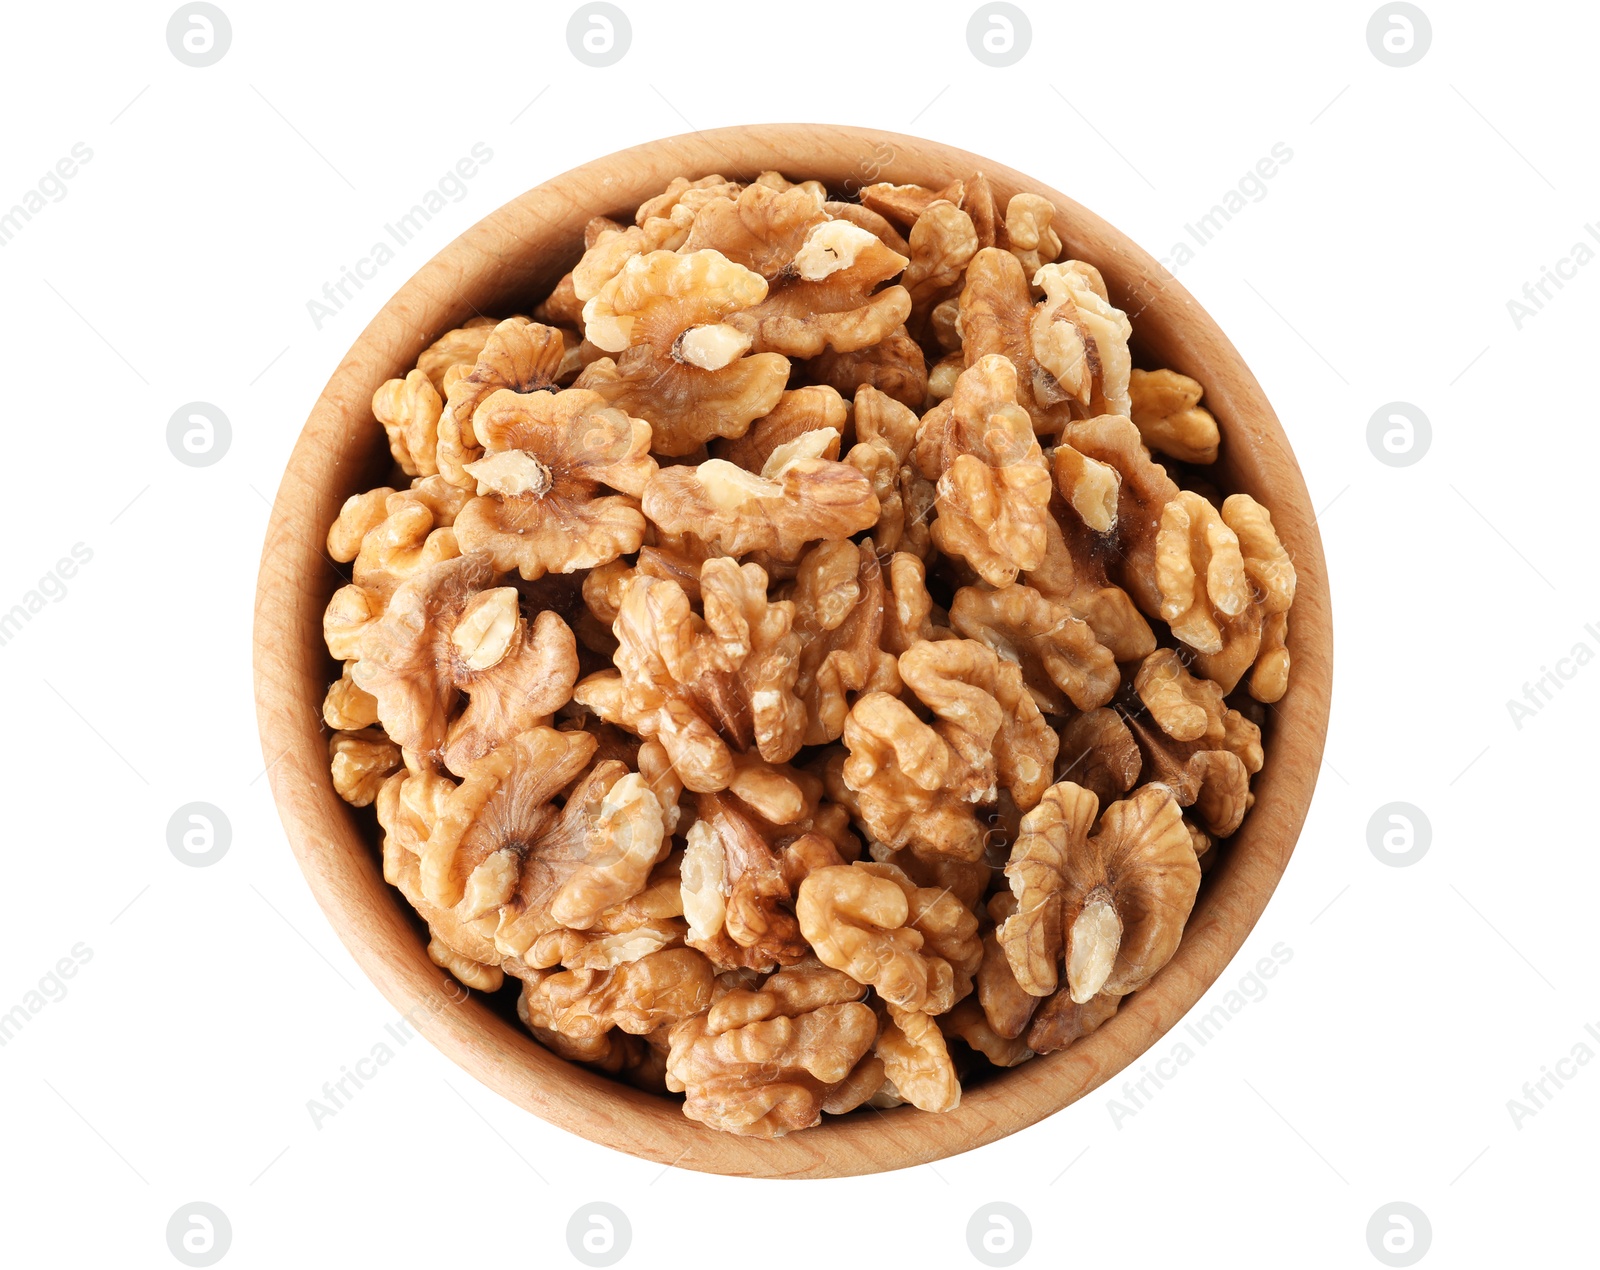 Photo of Bowl with walnuts on white background, top view